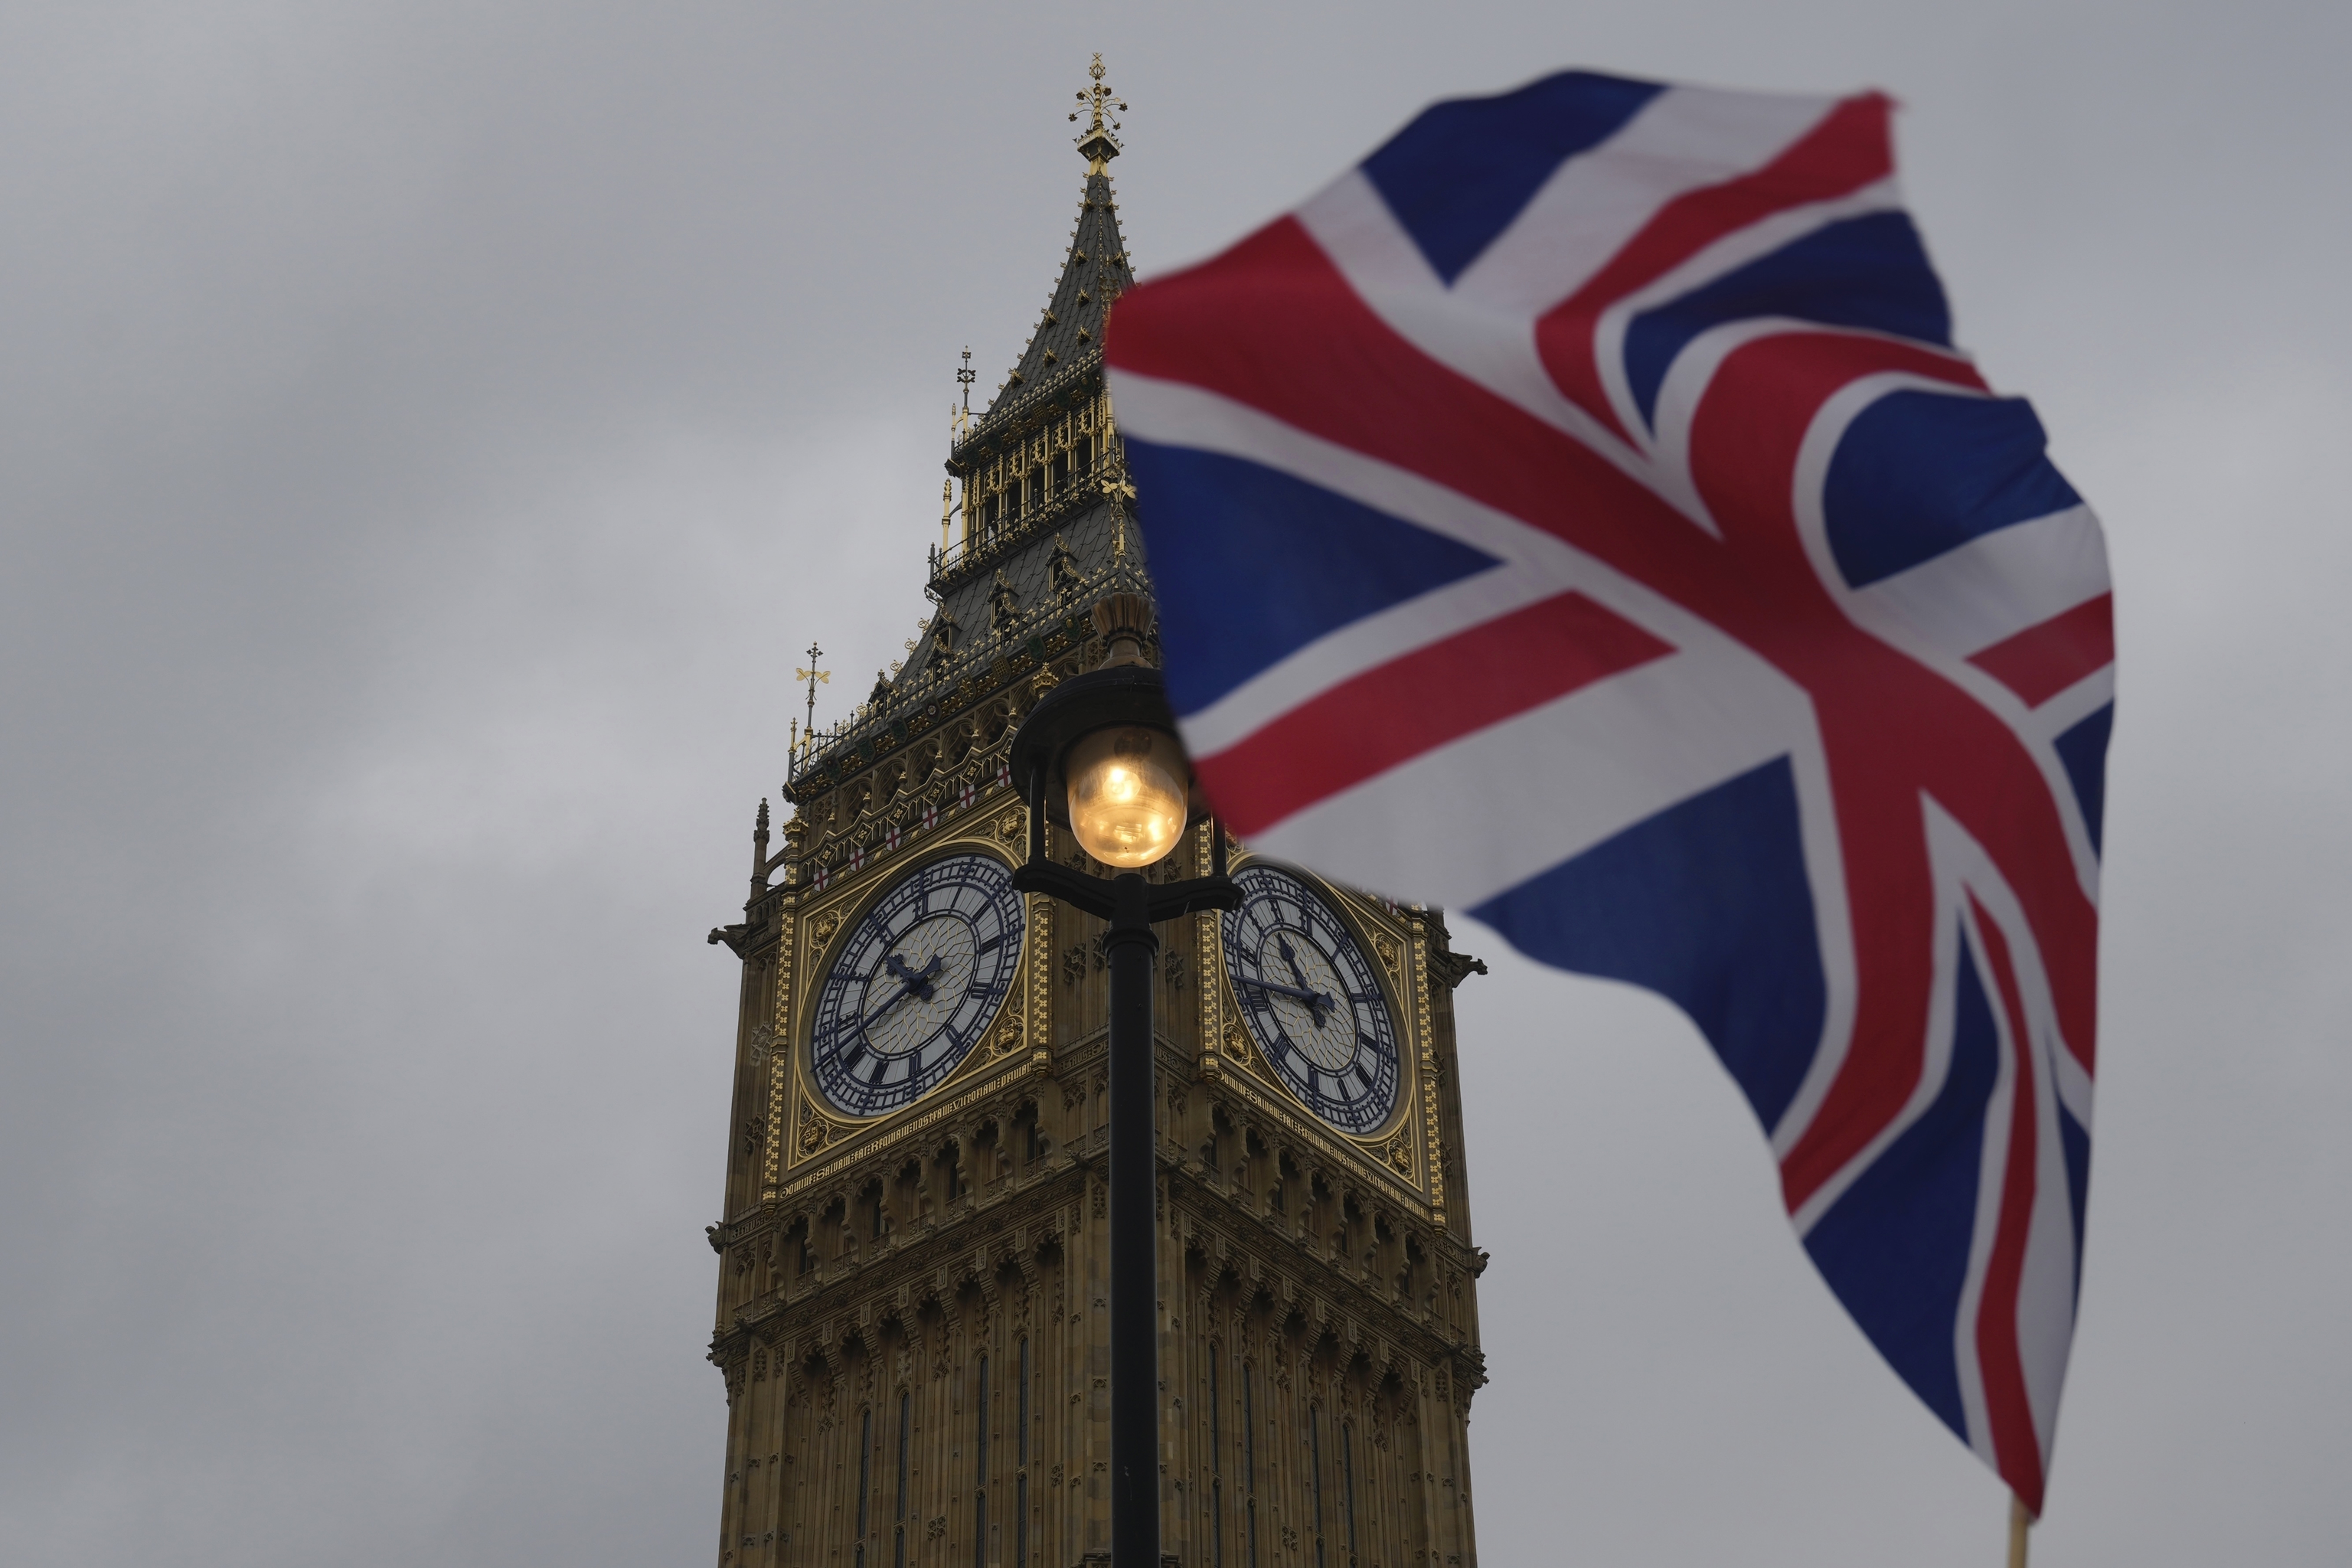 A Union flag outside the Houses of Parliament, in London.